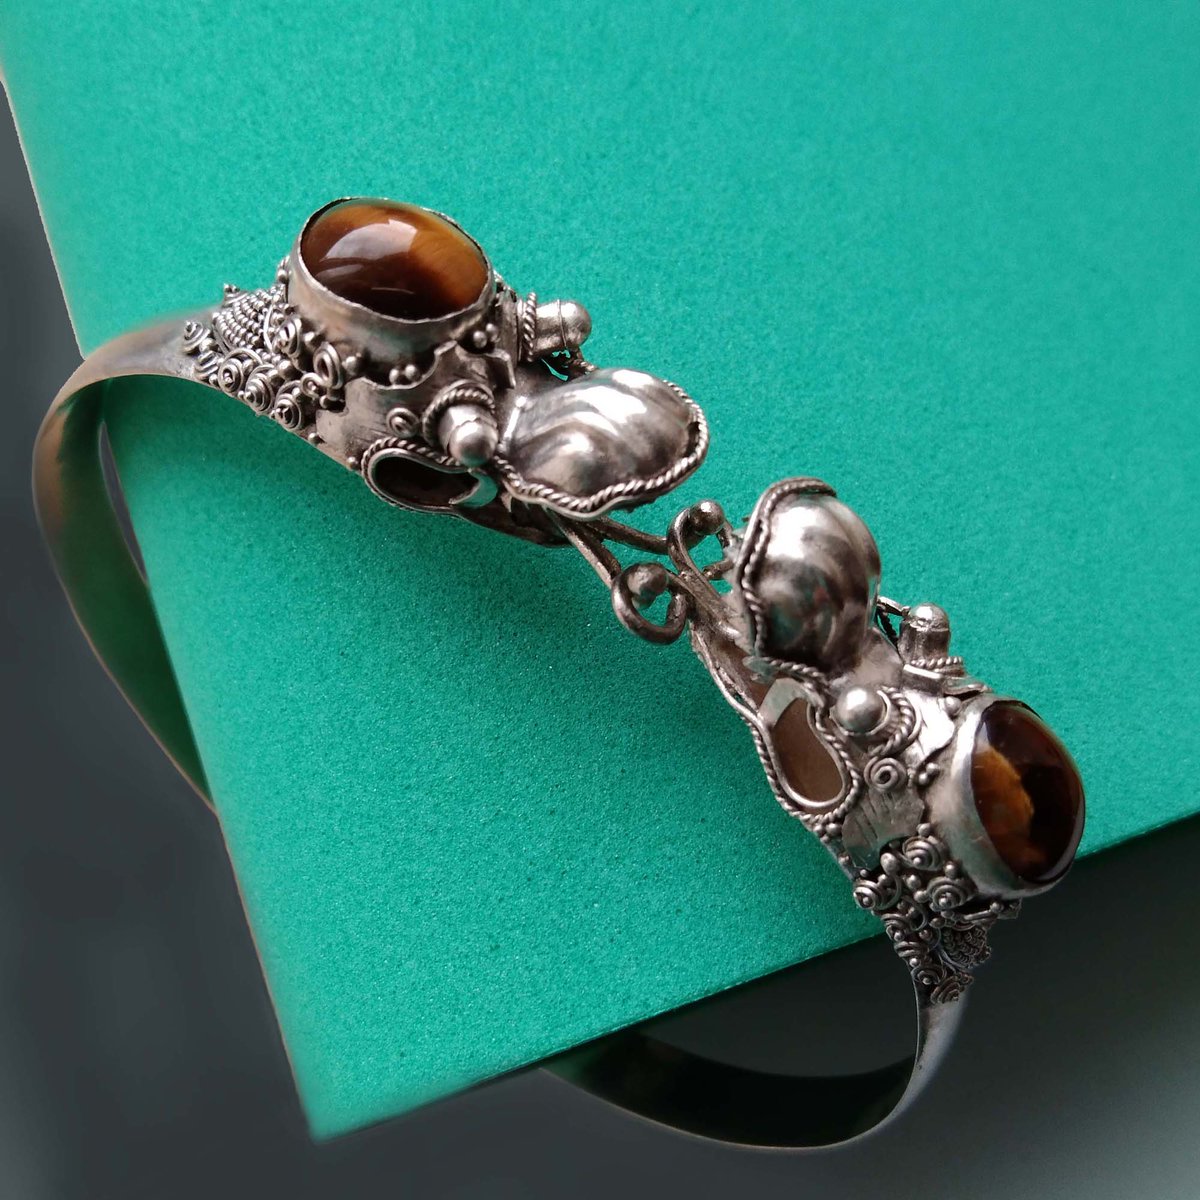 sochicfinds.com/products/doubl…
950 Silver Double Dragon Tigers Eye Stone Bangle Bracelet, Bali  #950Silver #DragonBracelet #TigersEyeStone #BangleBracelet, #BaliJewelry